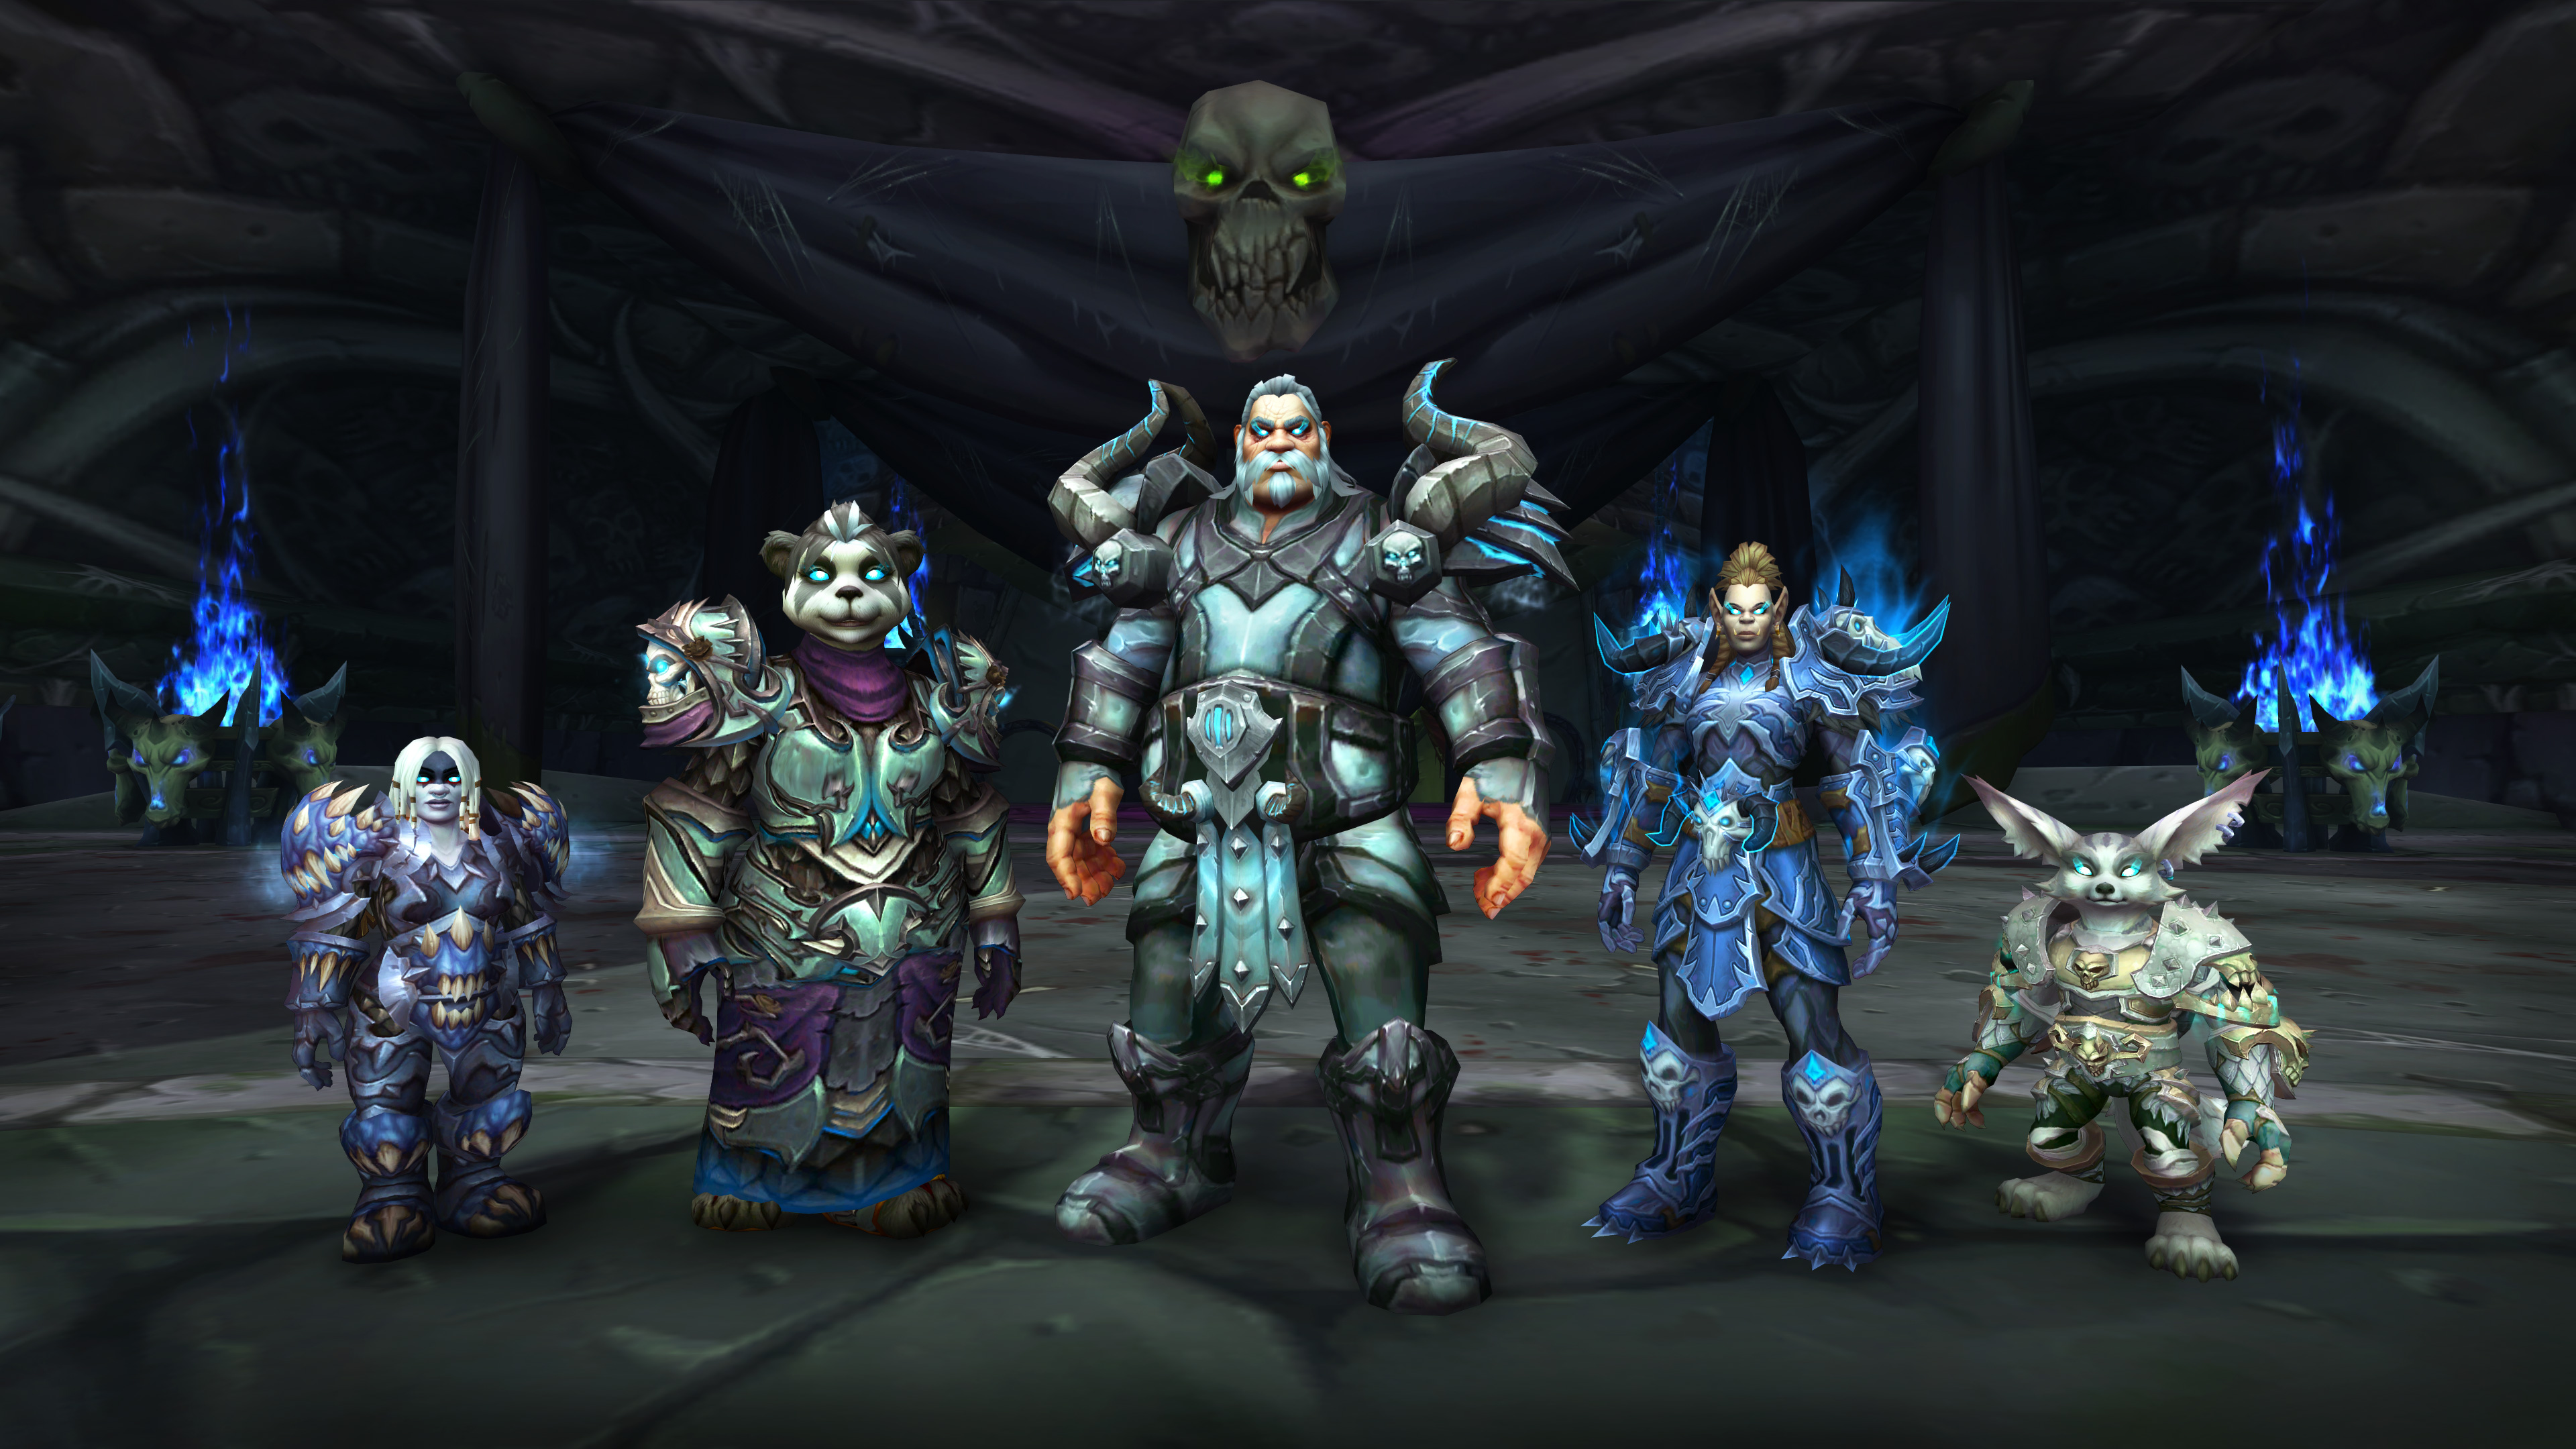 World of Warcraft - A group of players, representing different races from around Azeroth, stand in front of the camera. They are all Death Knights with grim armor and glowing blue eyes.